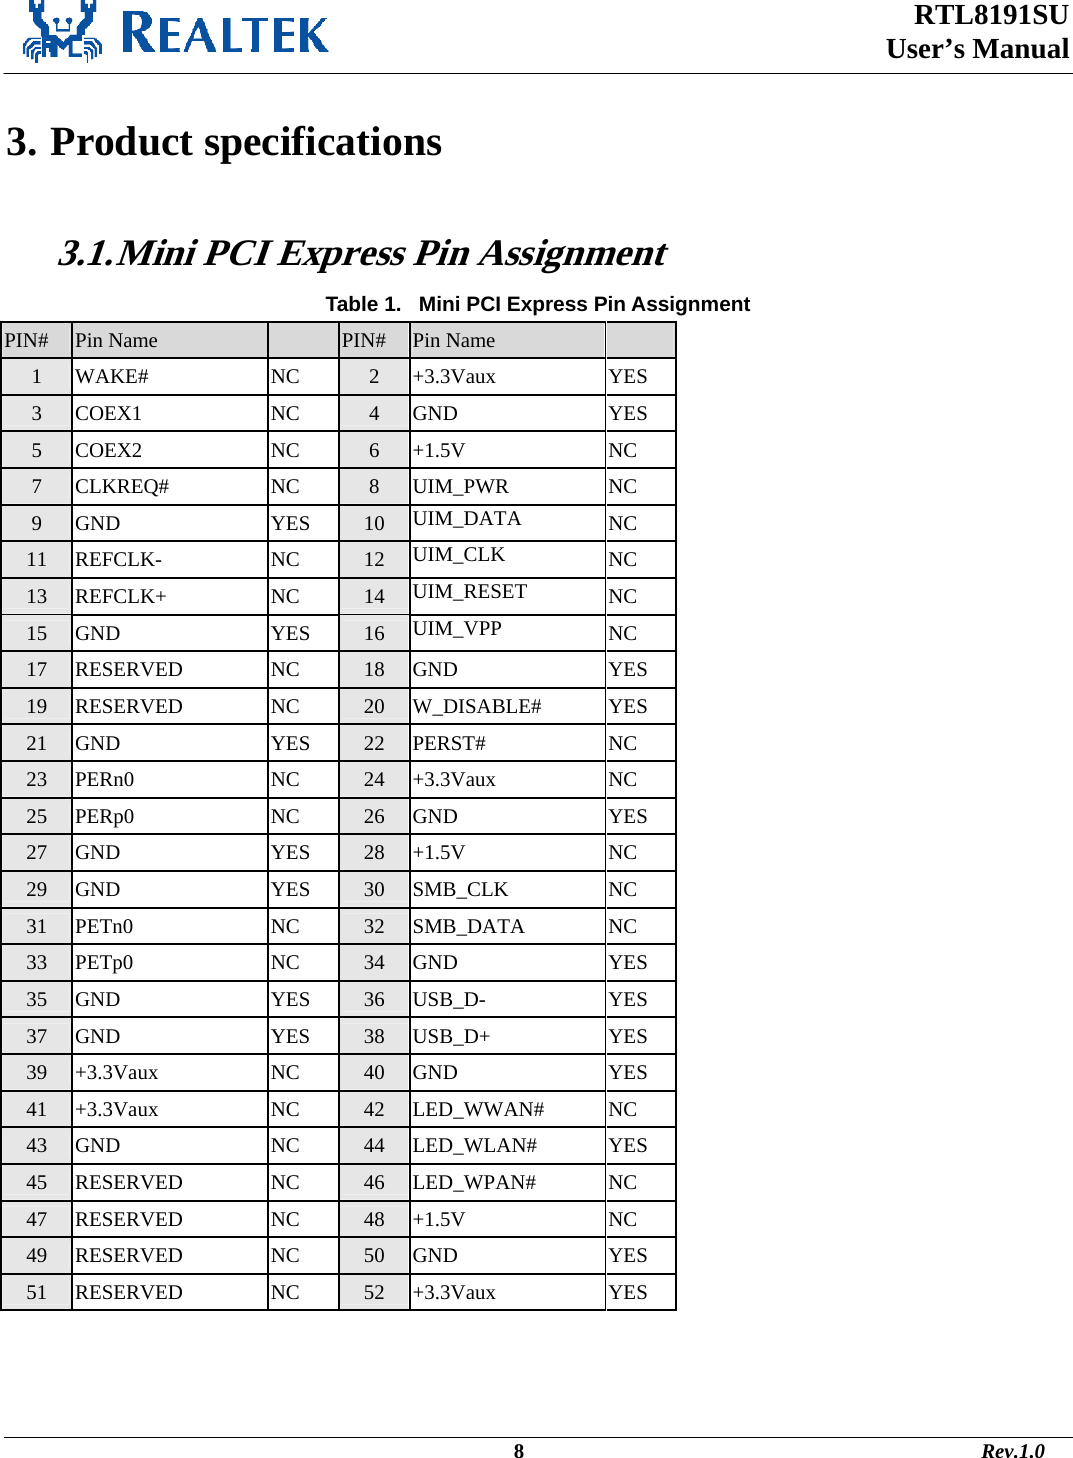  RTL8191SU  User’s Manual                                                                                             8                                                                                       Rev.1.0    3. Product specifications  3.1. Mini PCI Express Pin Assignment Table 1.   Mini PCI Express Pin Assignment PIN# Pin Name    PIN# Pin Name   1 WAKE# NC 2 +3.3Vaux YES 3 COEX1 NC 4 GND YES 5 COEX2 NC 6 +1.5V NC 7 CLKREQ# NC 8 UIM_PWR NC 9 GND YES 10 UIM_DATA  NC 11 REFCLK- NC 12 UIM_CLK  NC 13 REFCLK+ NC 14 UIM_RESET  NC 15 GND YES 16 UIM_VPP  NC 17 RESERVED NC 18 GND YES 19 RESERVED NC 20 W_DISABLE# YES 21 GND YES 22 PERST# NC 23 PERn0 NC 24 +3.3Vaux NC 25 PERp0 NC 26 GND YES 27 GND YES 28 +1.5V NC 29 GND YES 30 SMB_CLK NC 31 PETn0 NC 32 SMB_DATA NC 33 PETp0 NC 34 GND YES 35 GND YES 36 USB_D- YES 37 GND YES 38 USB_D+ YES 39 +3.3Vaux NC 40 GND YES 41 +3.3Vaux NC 42 LED_WWAN# NC 43 GND NC 44 LED_WLAN# YES 45 RESERVED NC 46 LED_WPAN# NC 47 RESERVED NC 48 +1.5V NC 49 RESERVED NC 50 GND YES 51 RESERVED NC 52 +3.3Vaux YES  